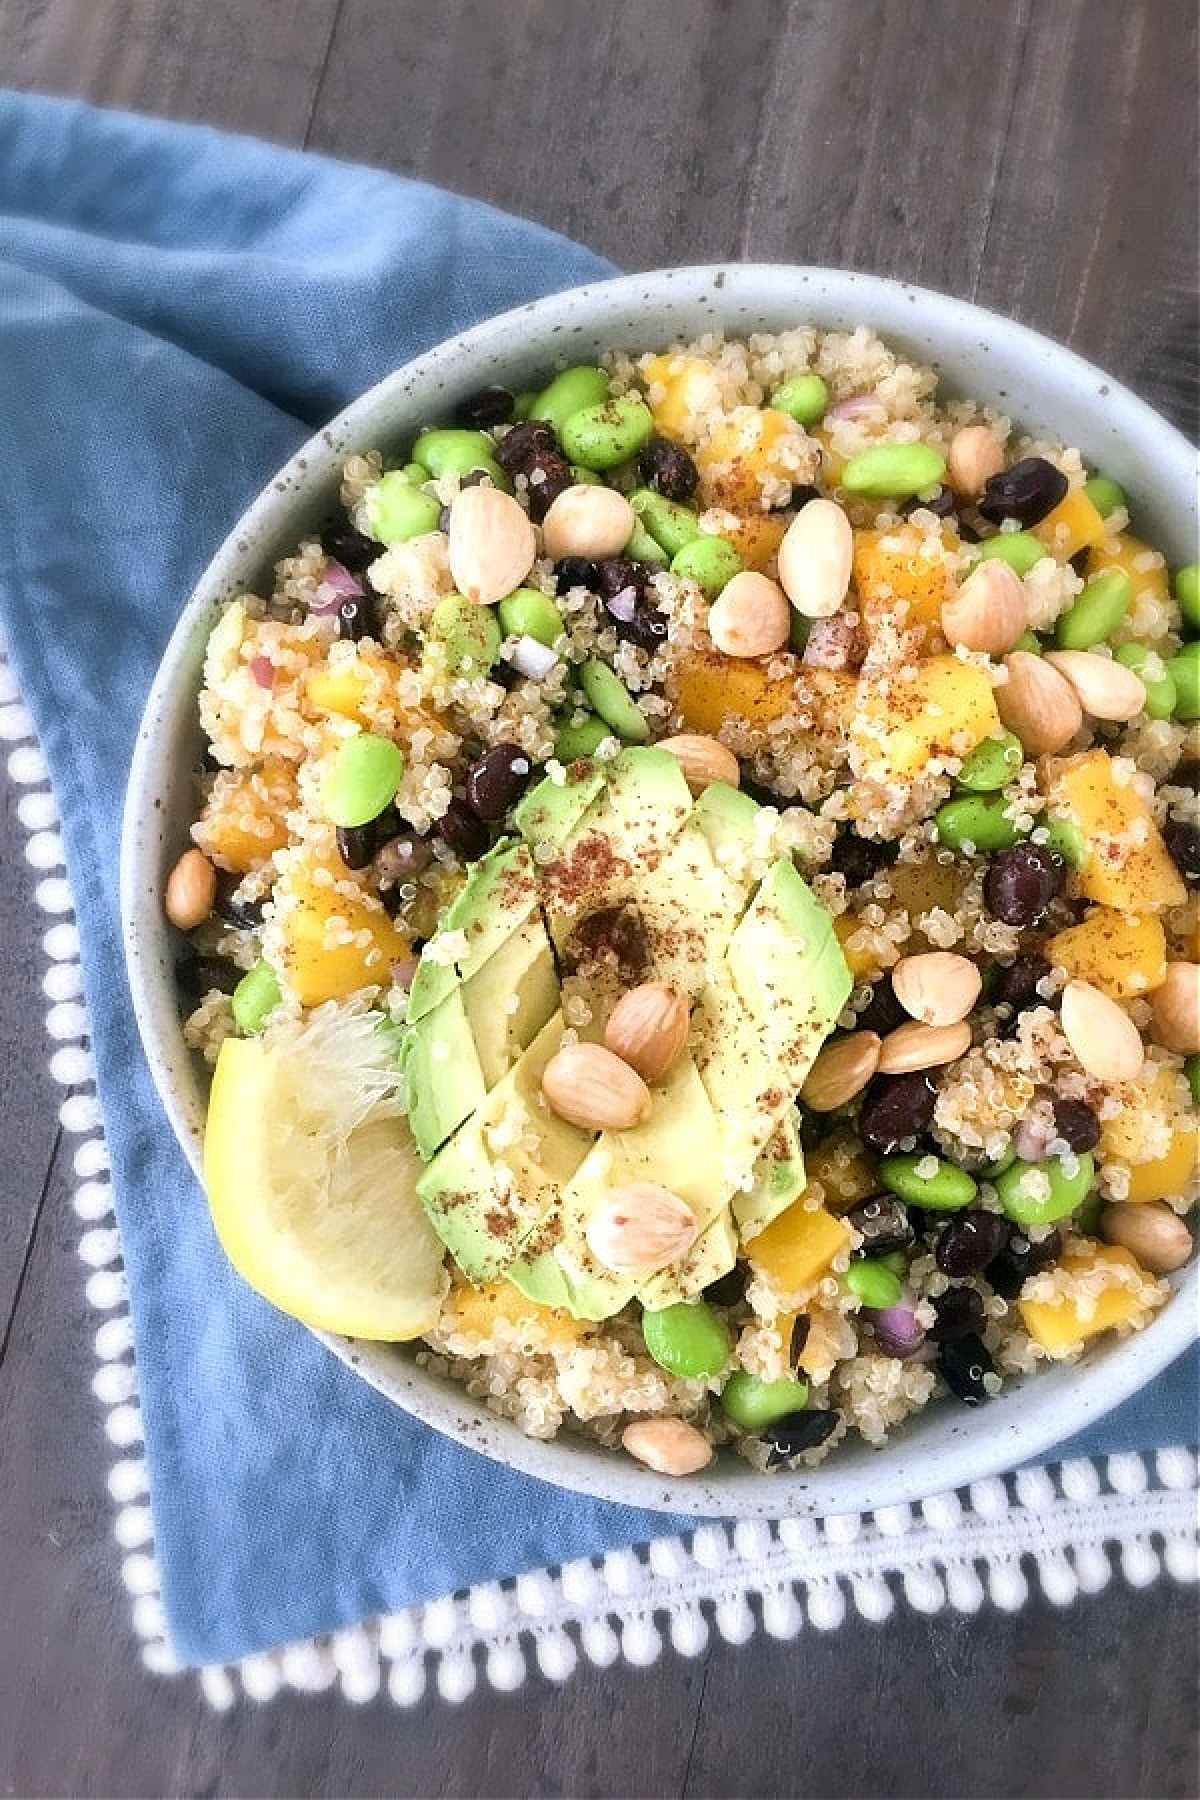 Overhead view of mango edamame quinoa salad in a bowl, topped with cubed avocado and a lemon slice. Light blue cloth napkin under bowl.